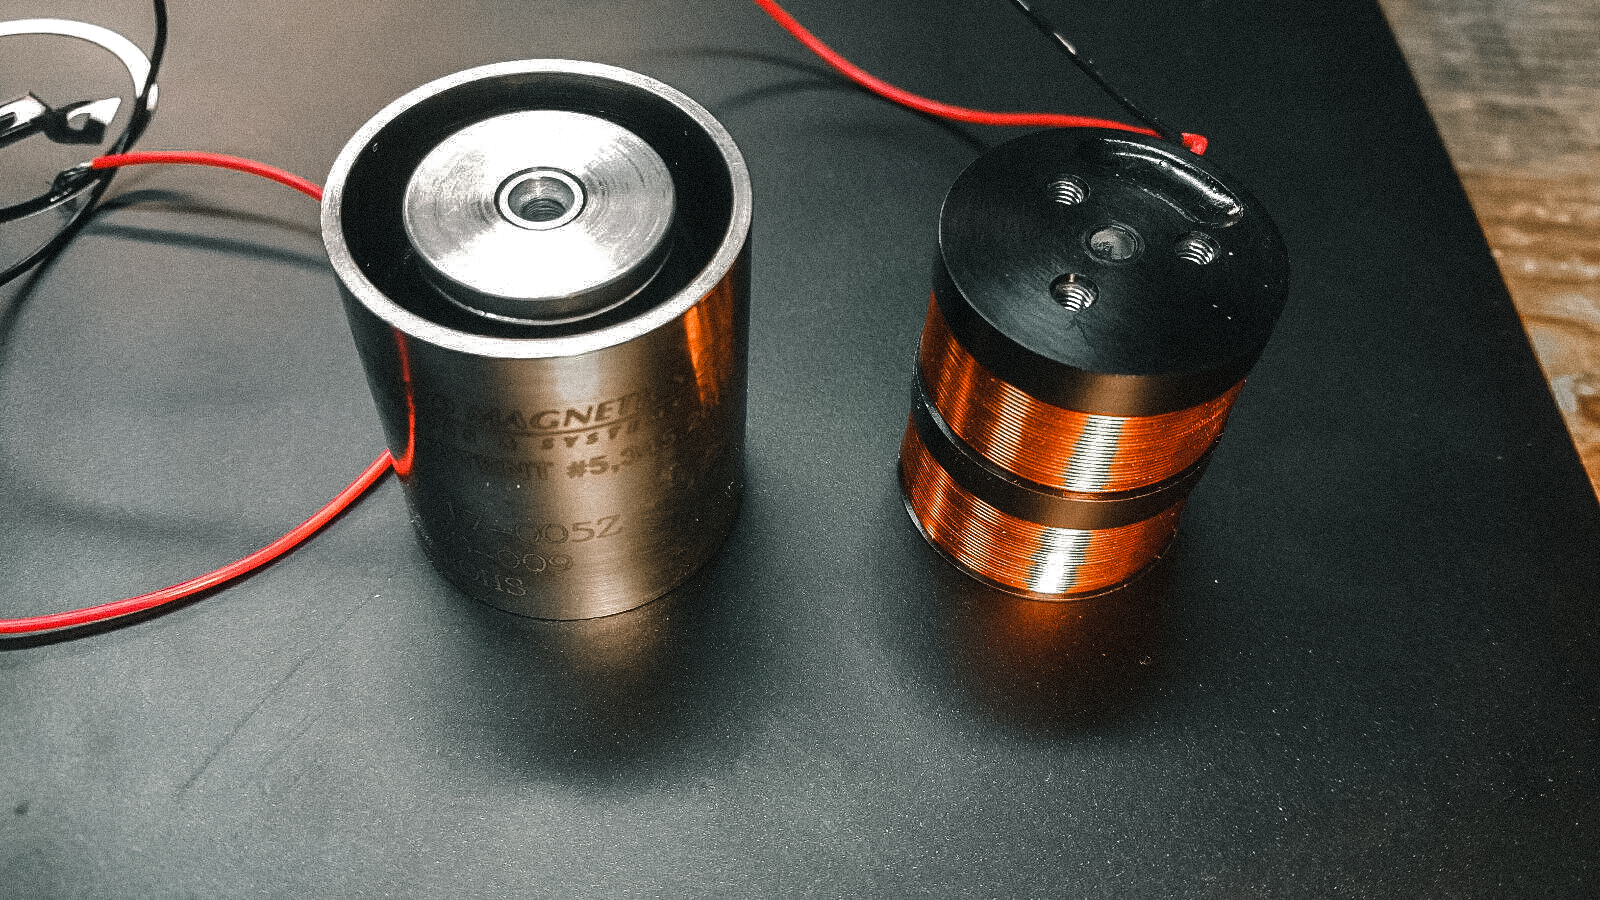 Speaker voice coil that is being put together.